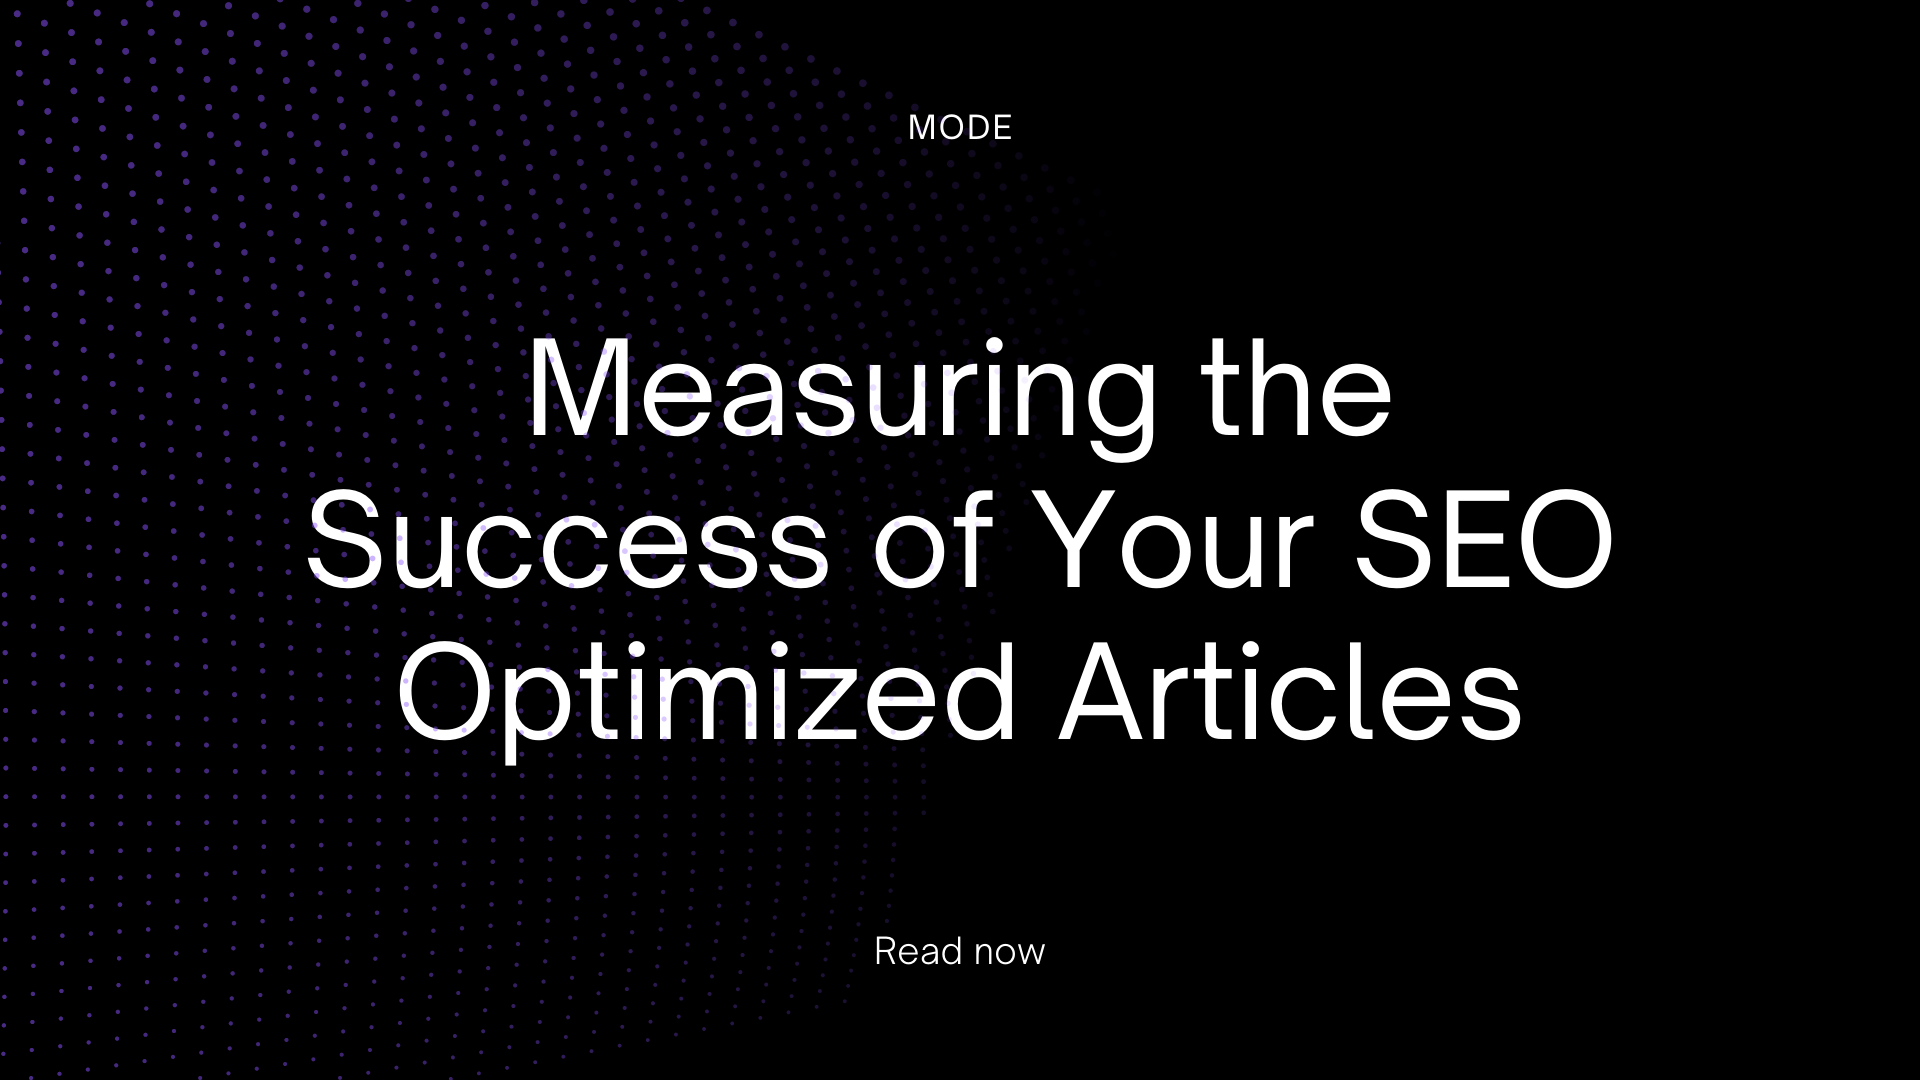 Measuring the Success of Your SEO Optimized Articles